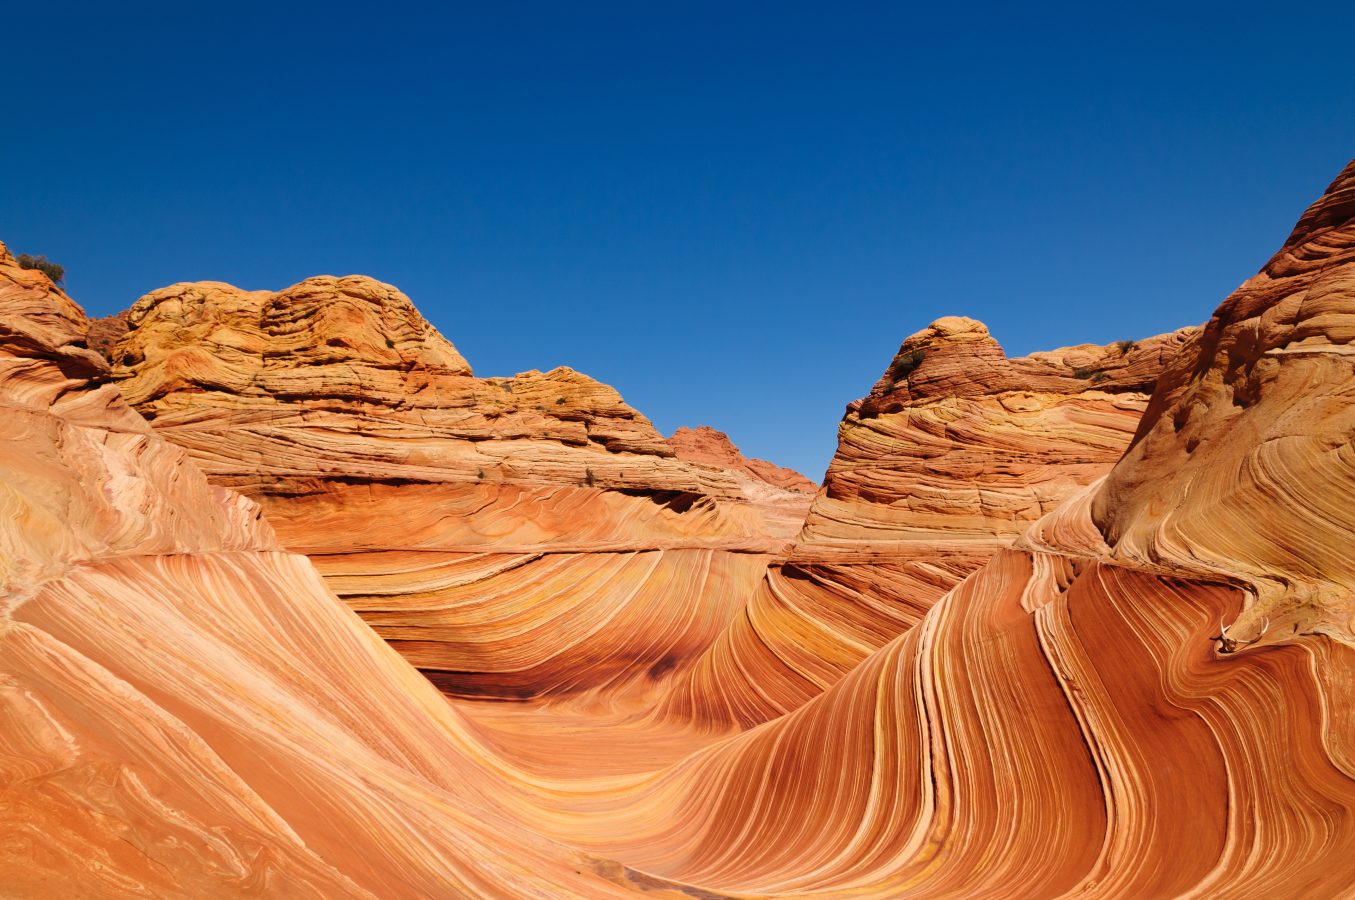 Bright orange rock formations of The Wave in Arizona.